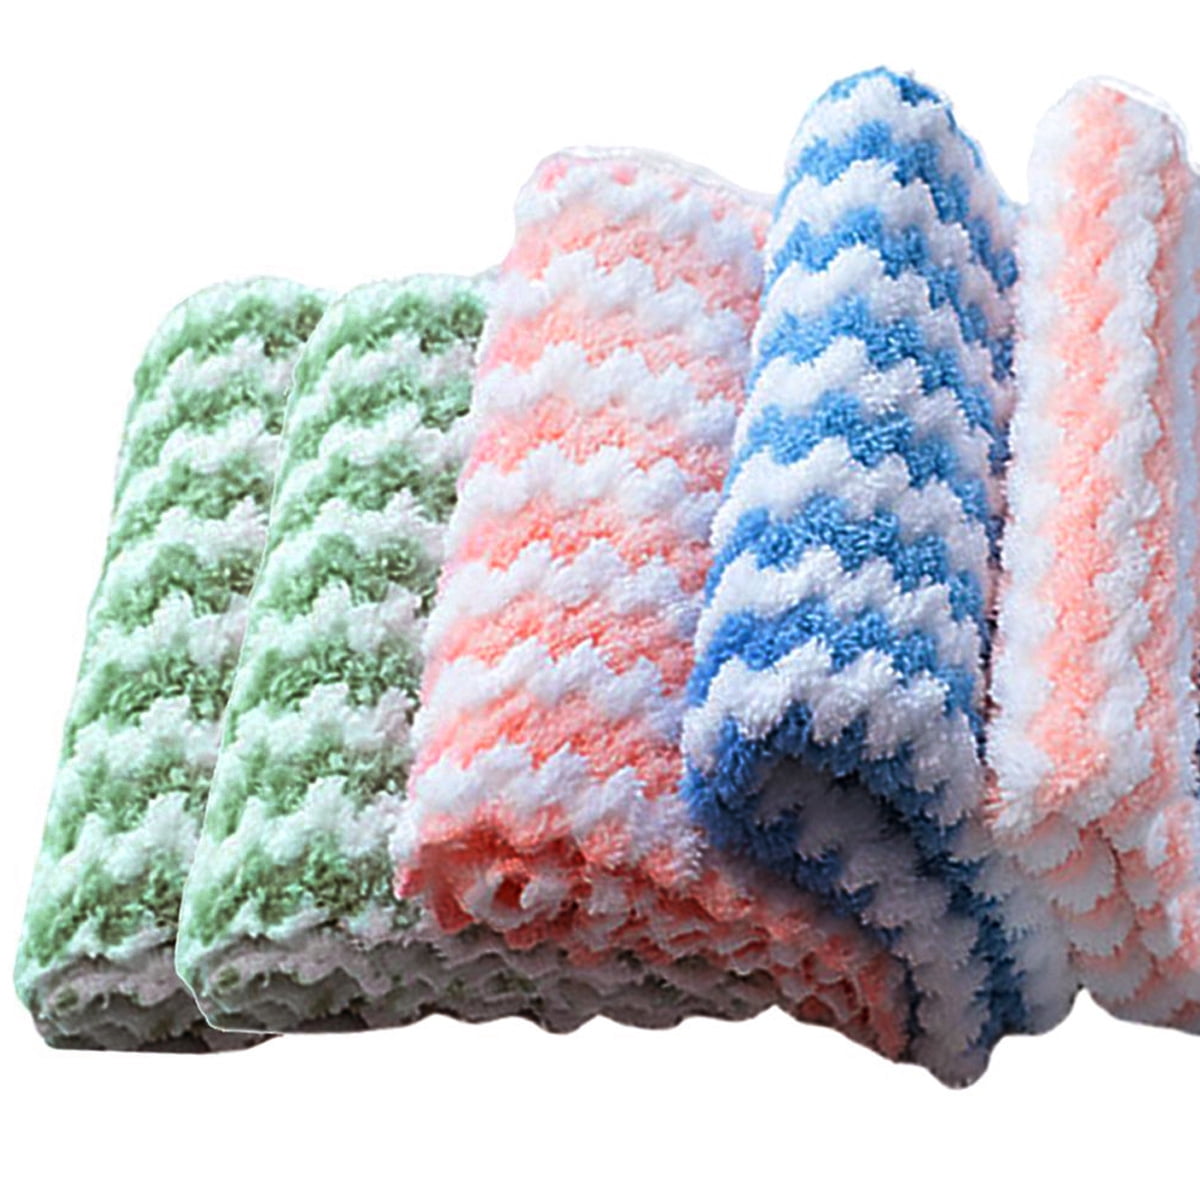 Walbest 5 Pack Microfiber Dish Cloth for Washing Dishes, Striped Dish Towel Rags, Best Kitchen Washcloth Cleaning Cloths Random Color 12 inchx12 inch